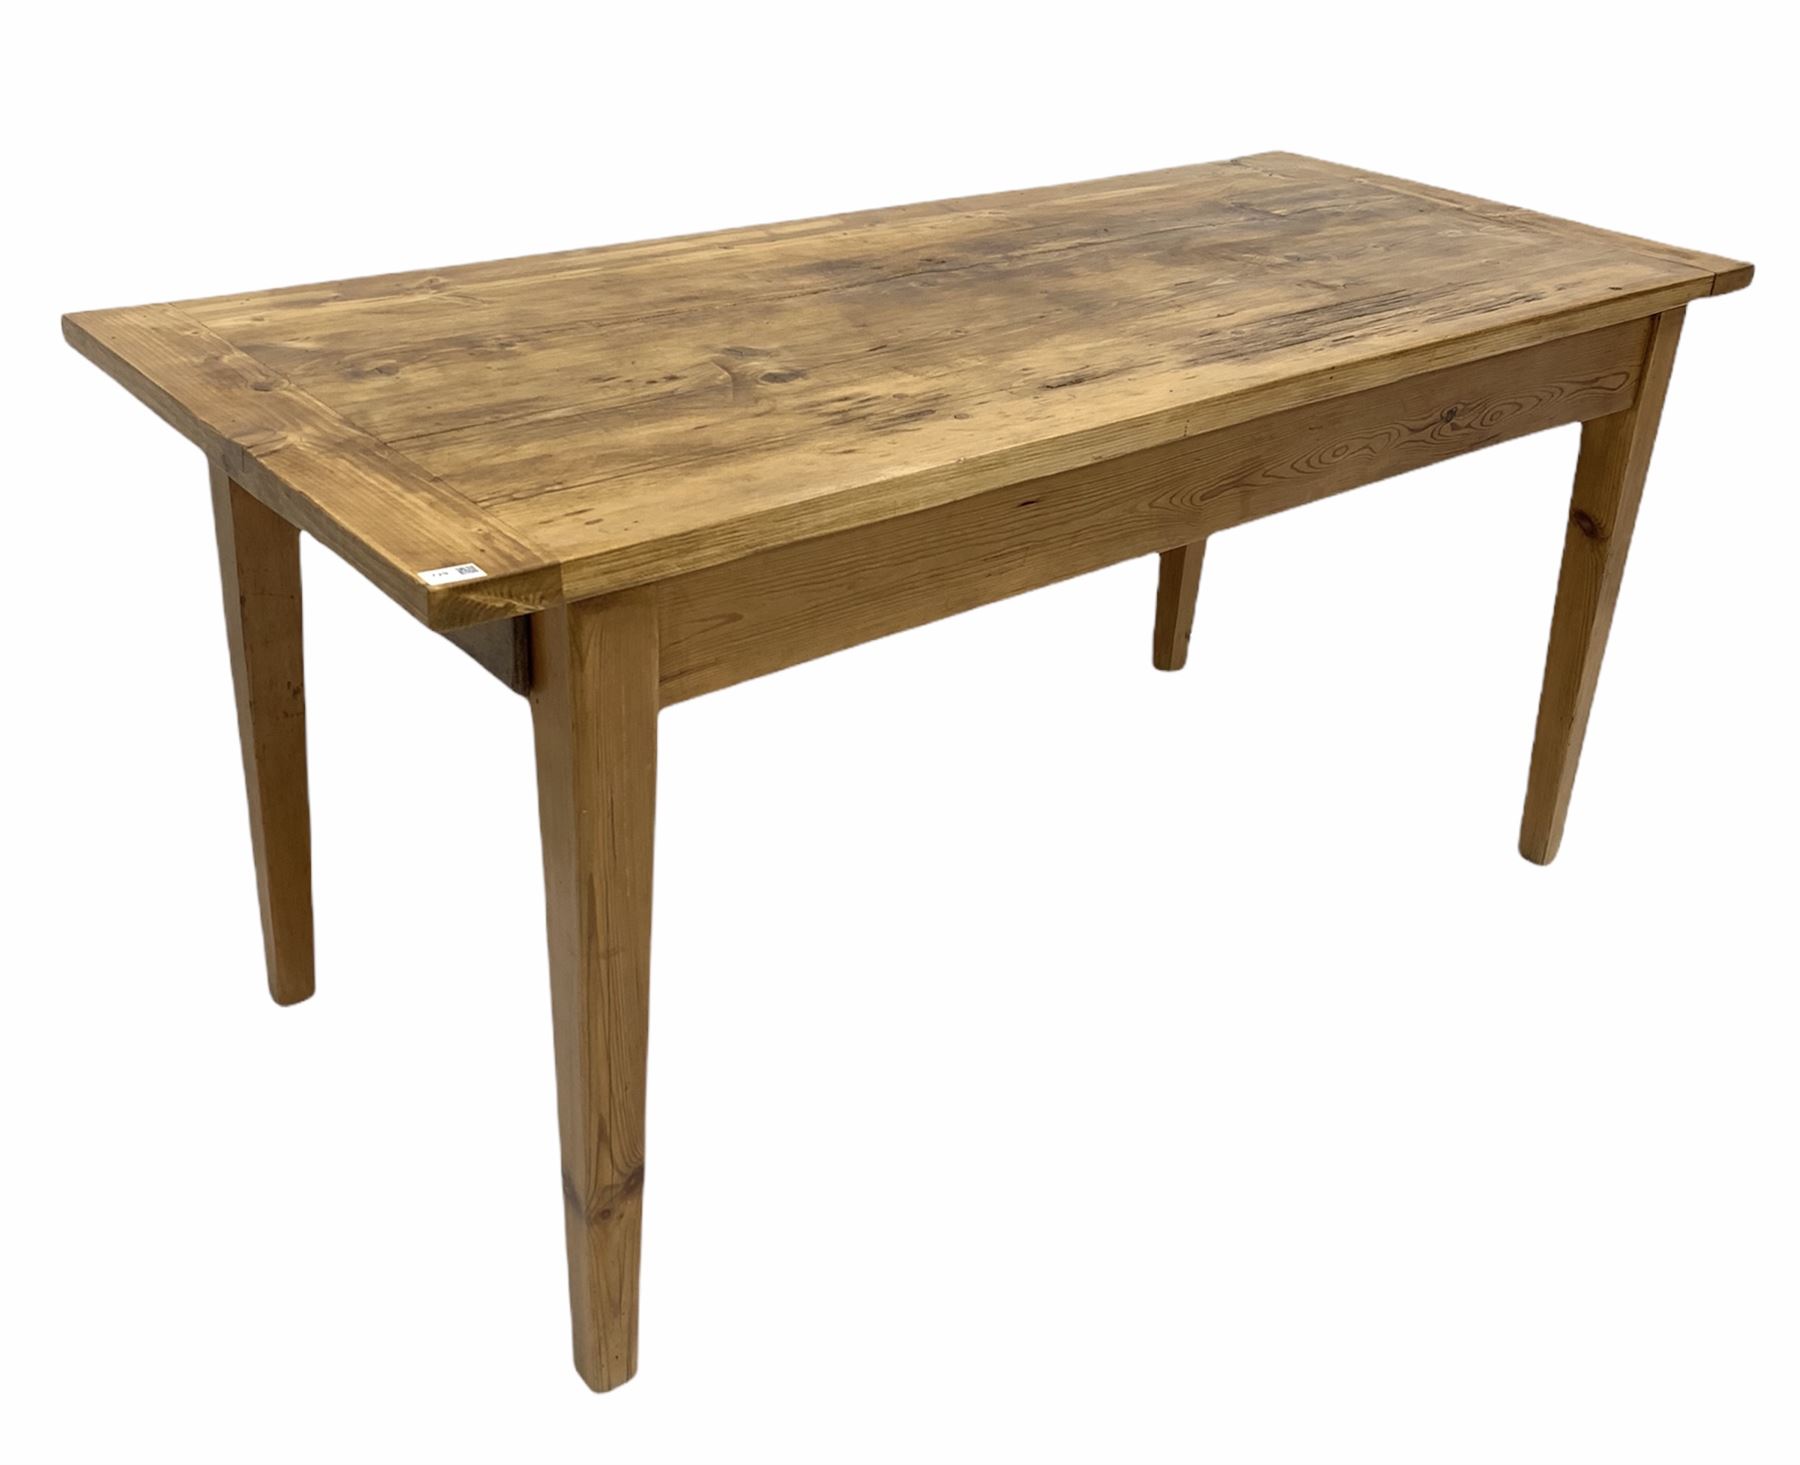 Farmhouse pine dining table - Image 2 of 4